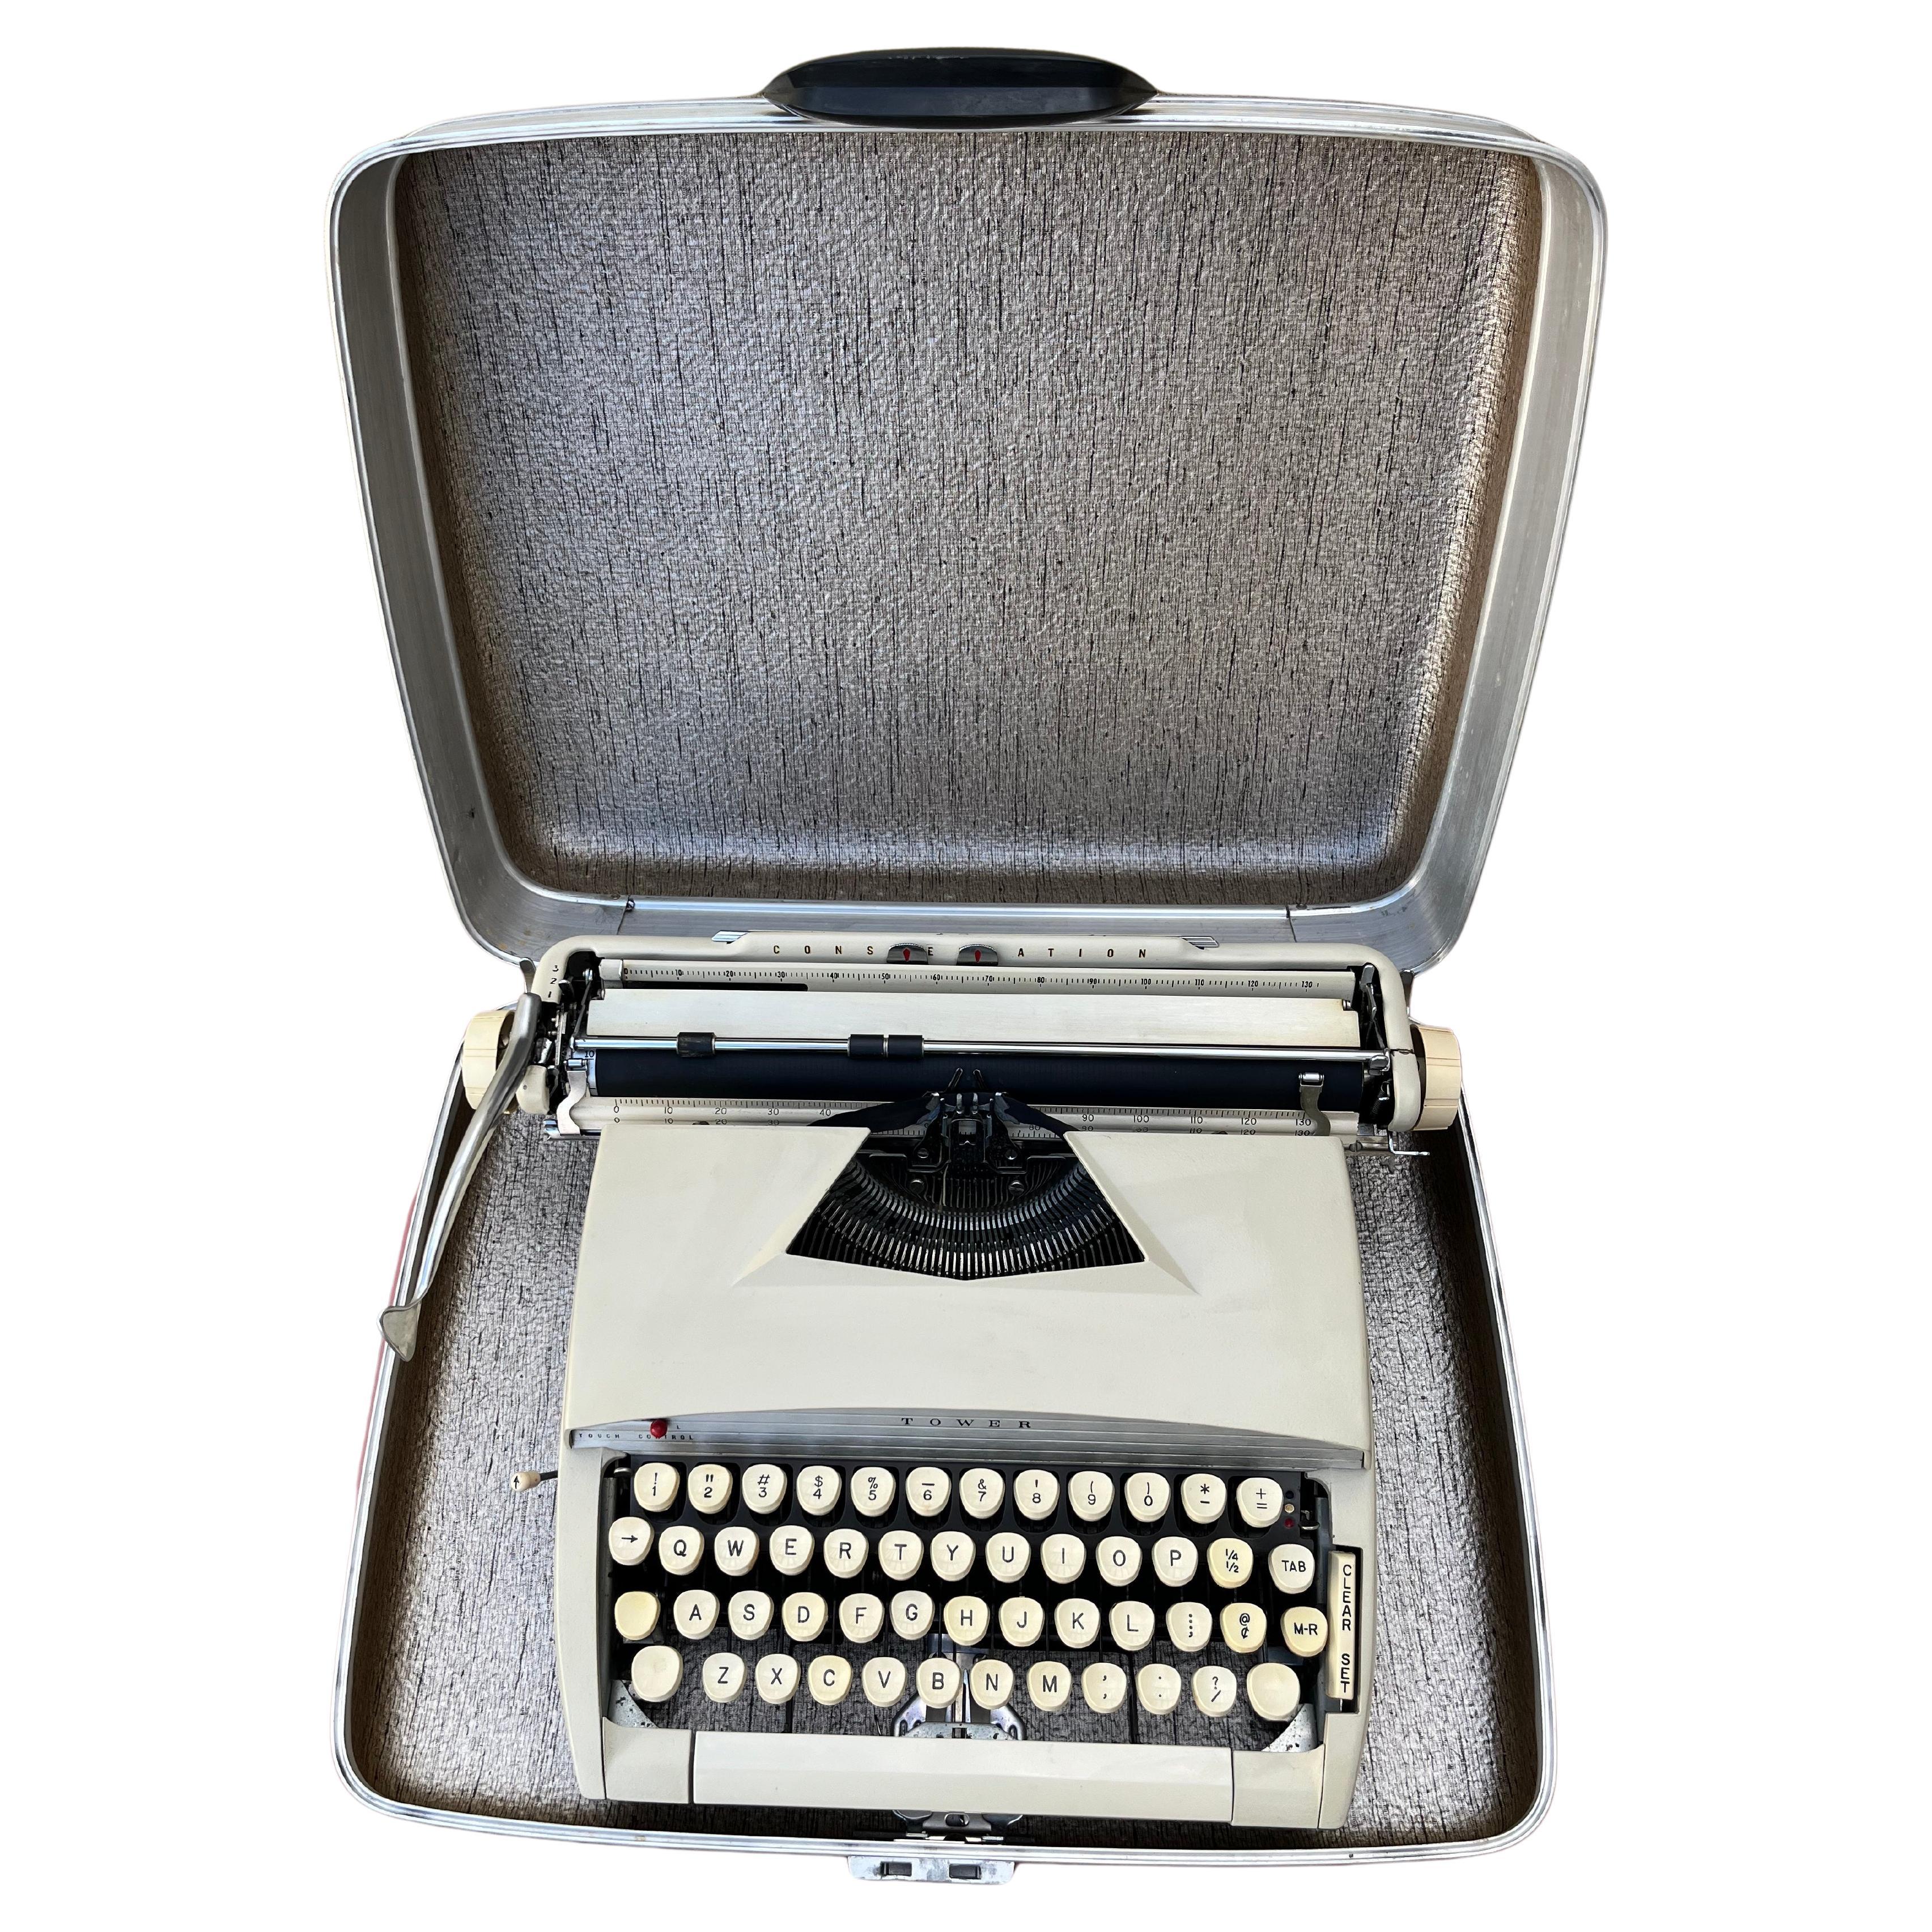 Sears Tower Constellation Portable Typewriter W/Metal Case. Circa 1960s. For Sale